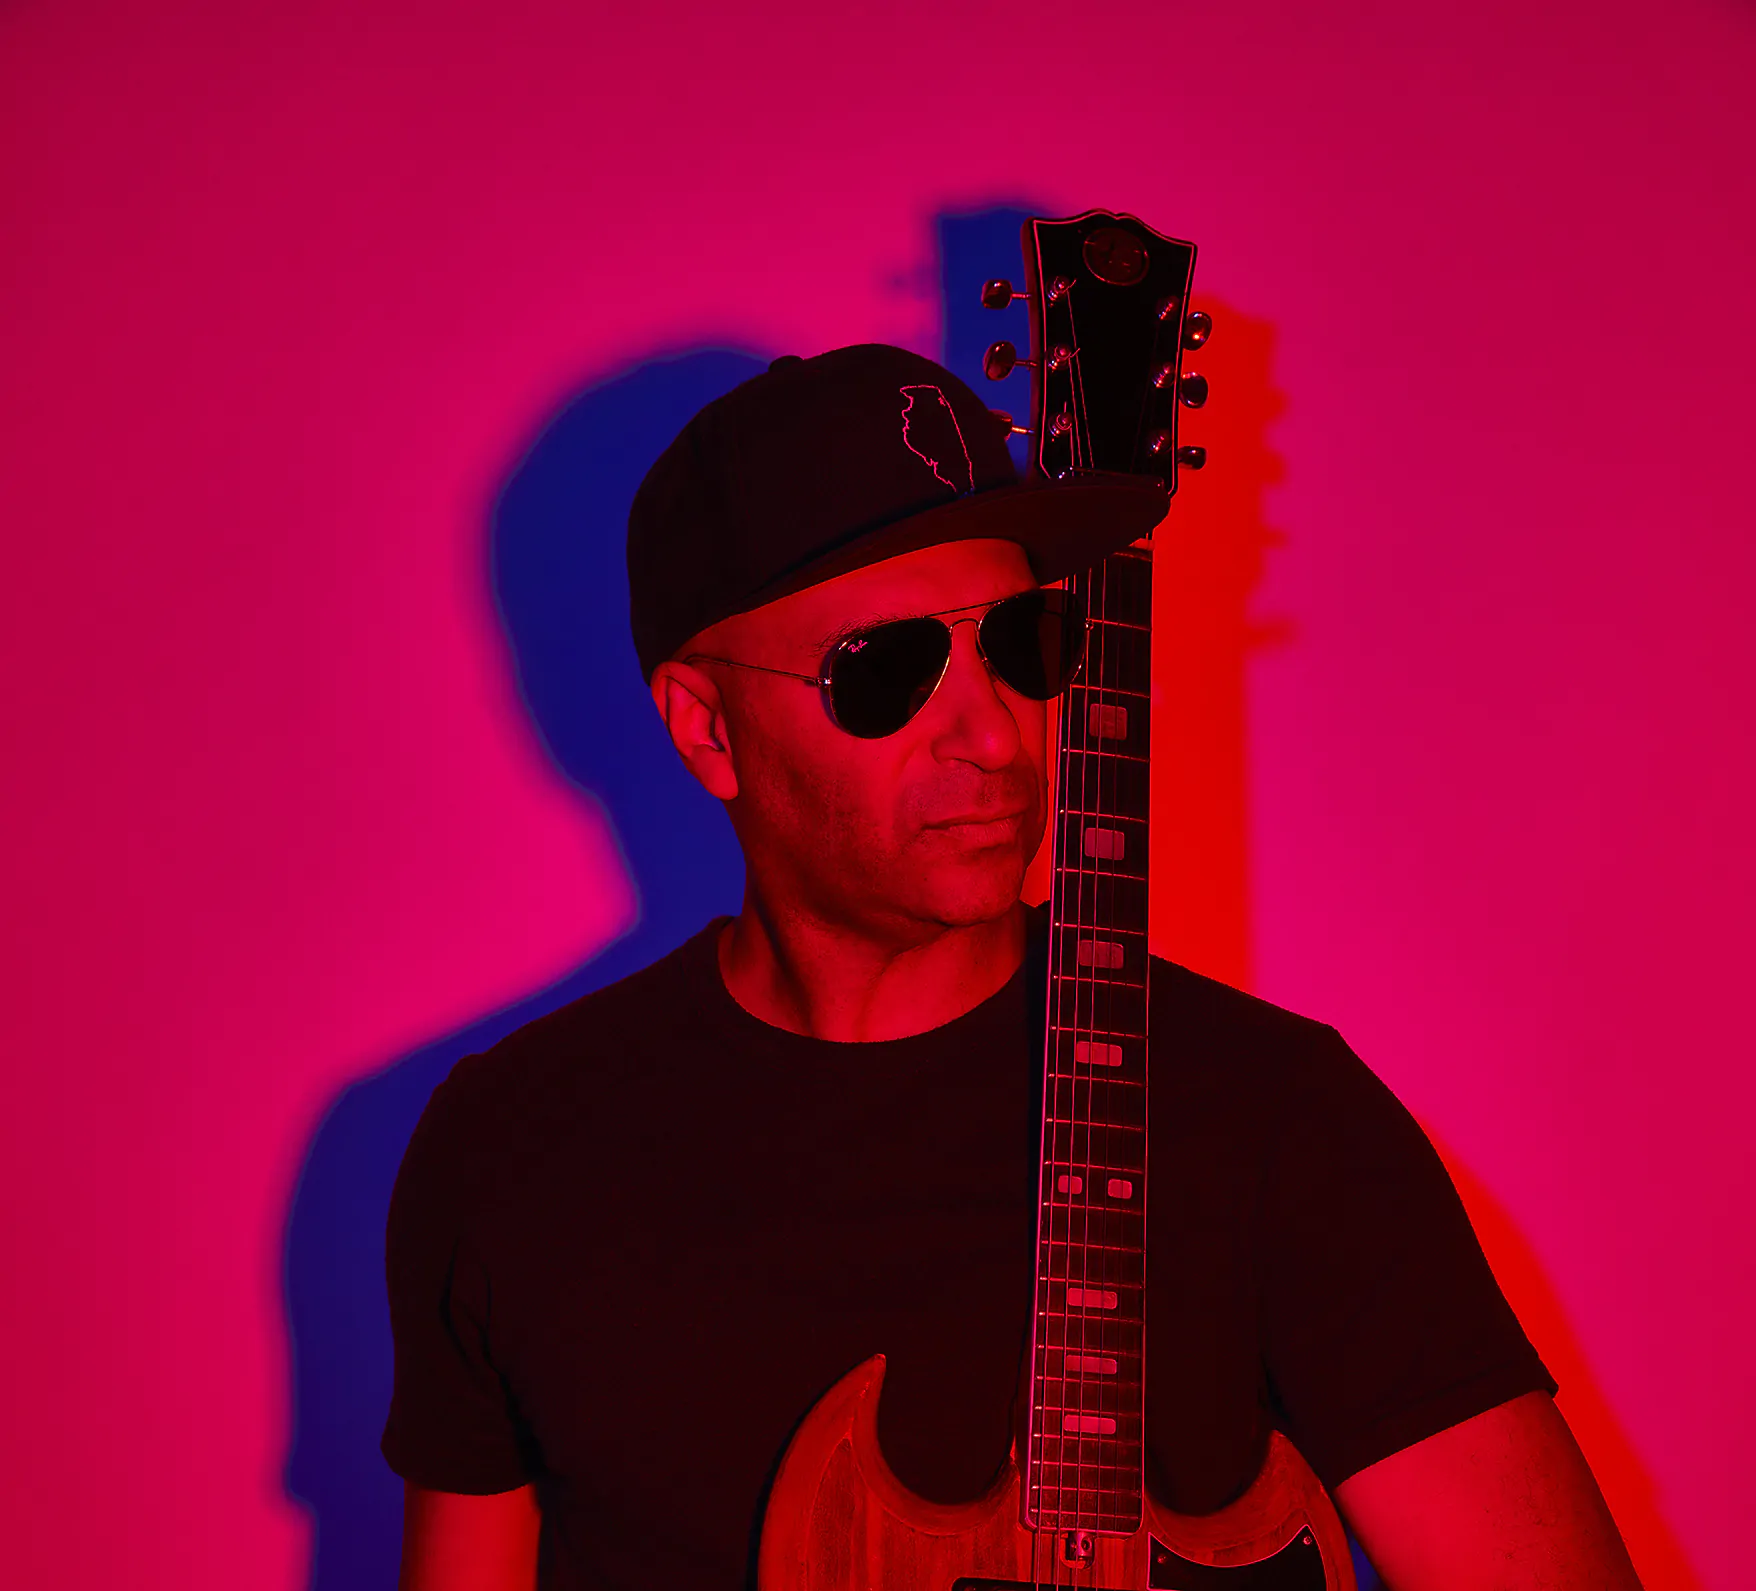 TOM MORELLO releases new single “Driving To Texas” featuring Phantogram